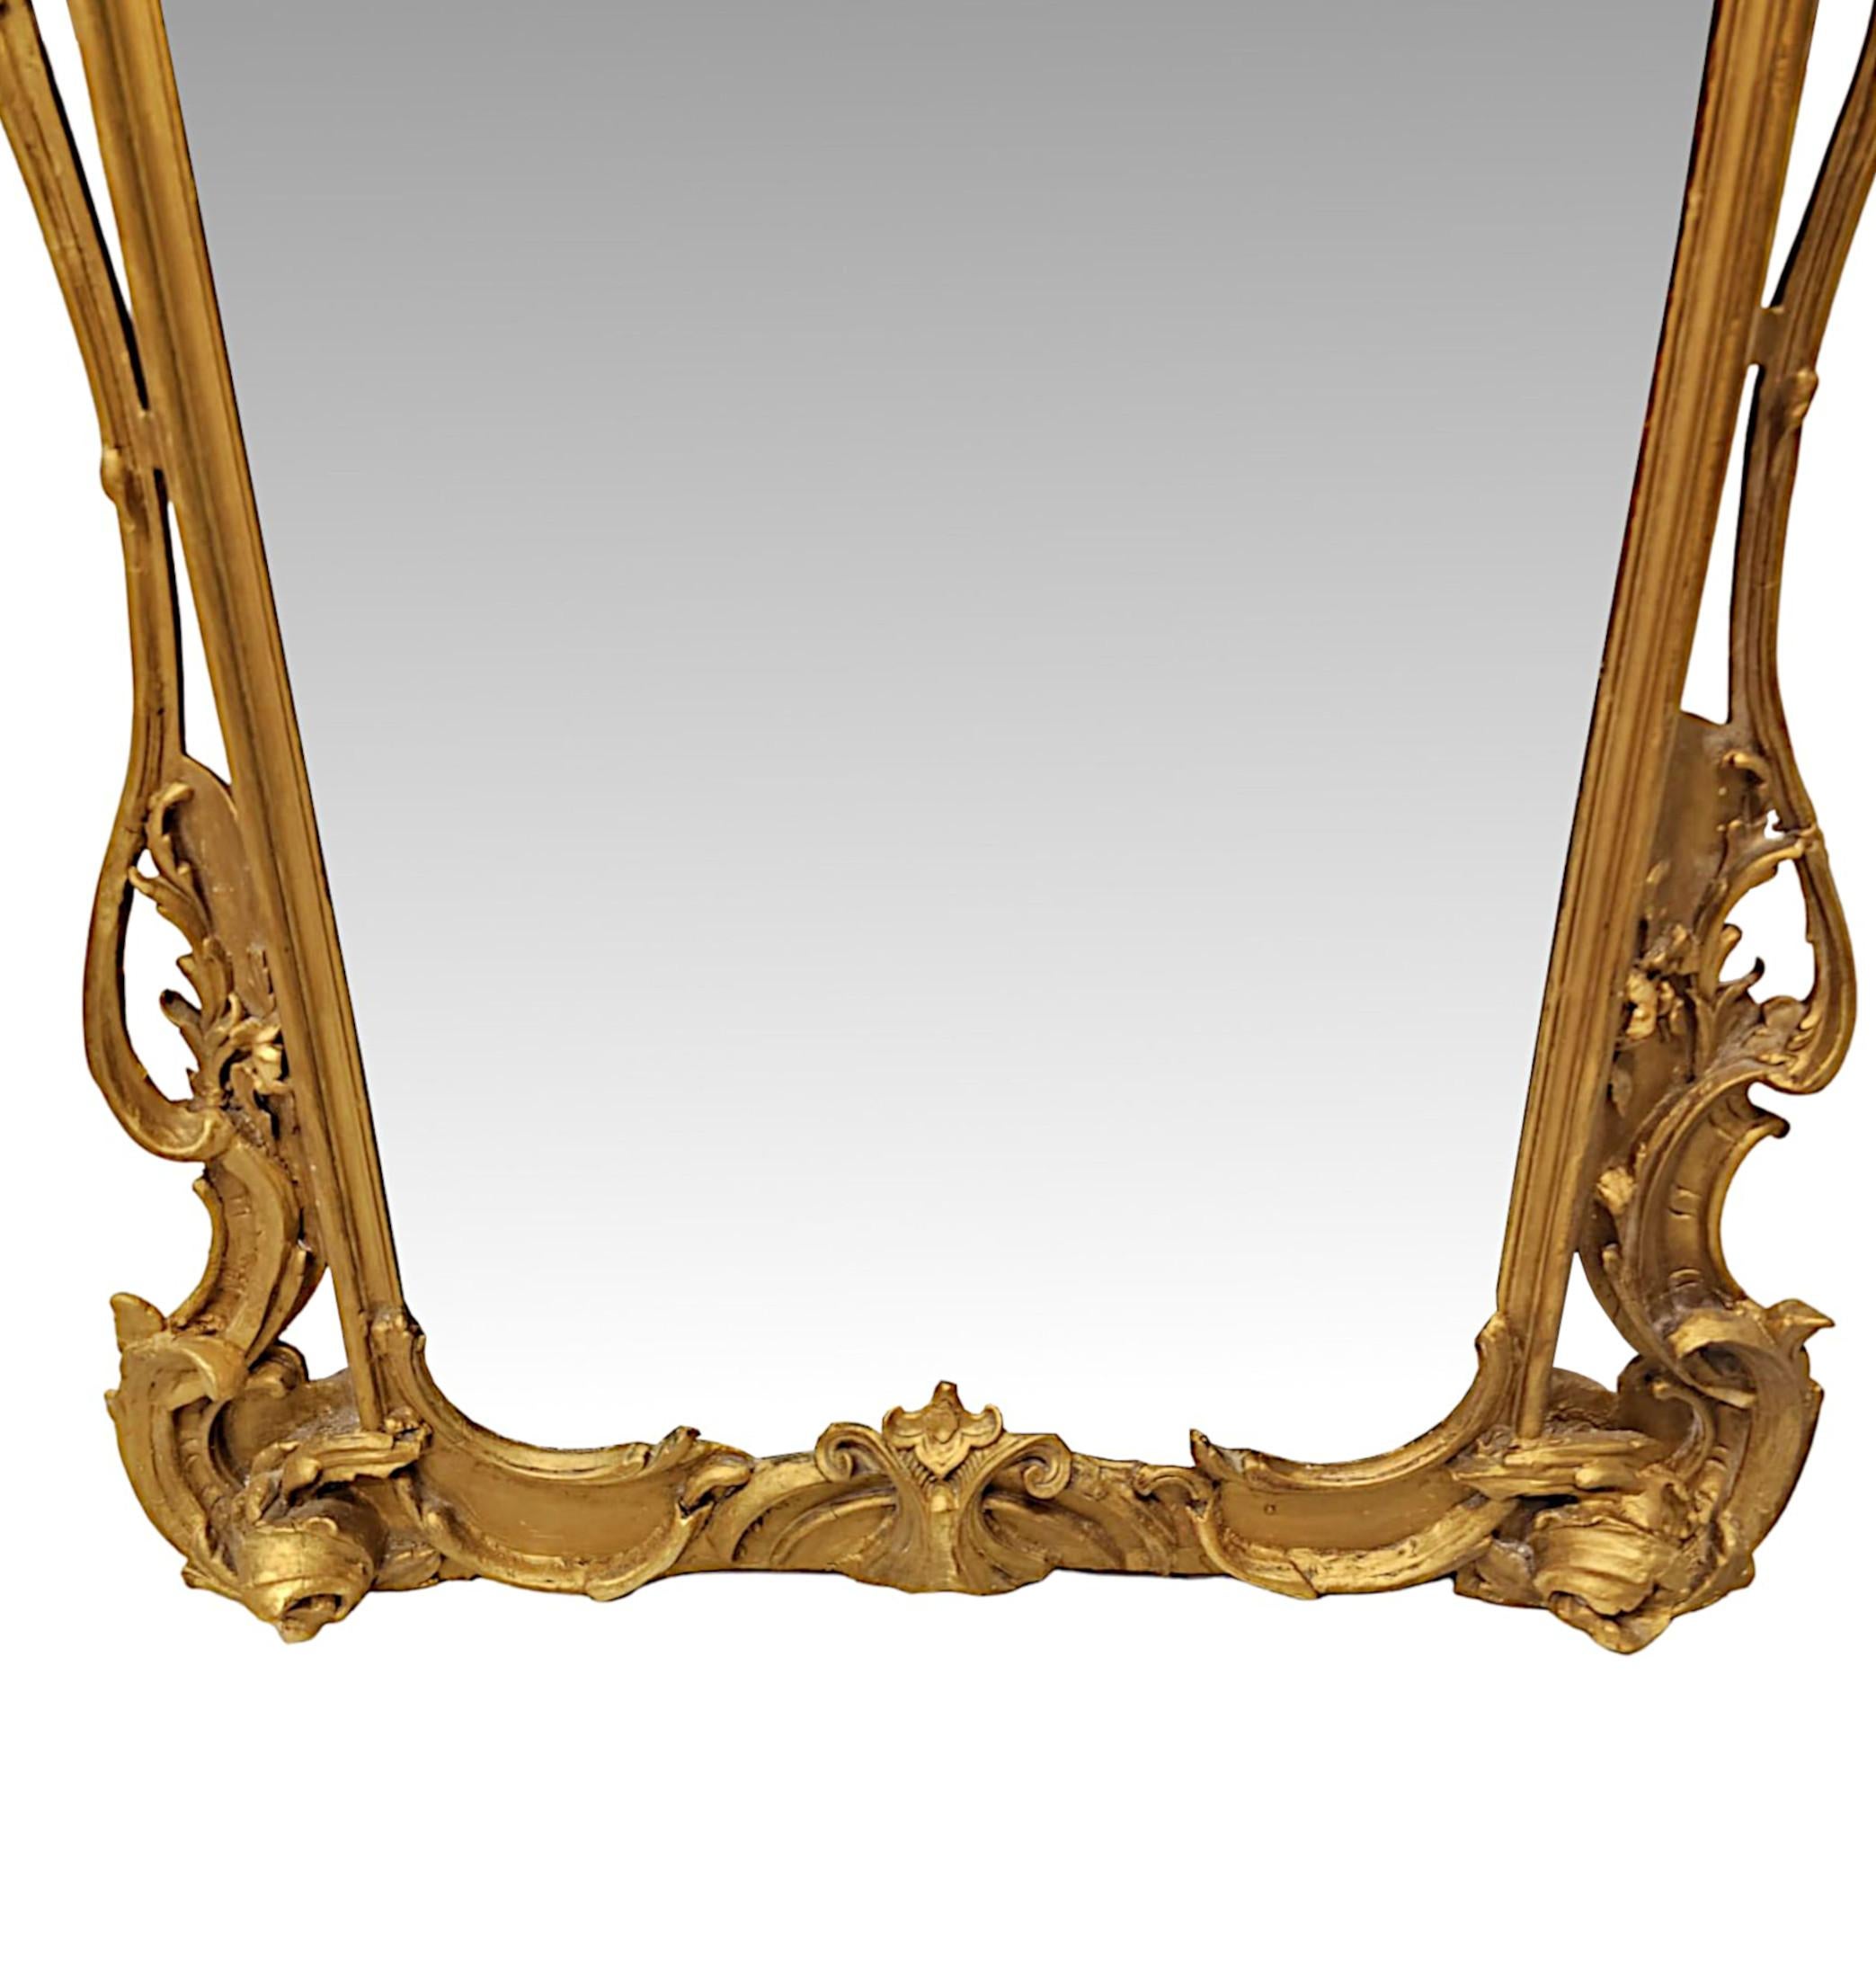 English A Rare 19th Century Giltwood Pier or Hall or Dressing Mirror For Sale